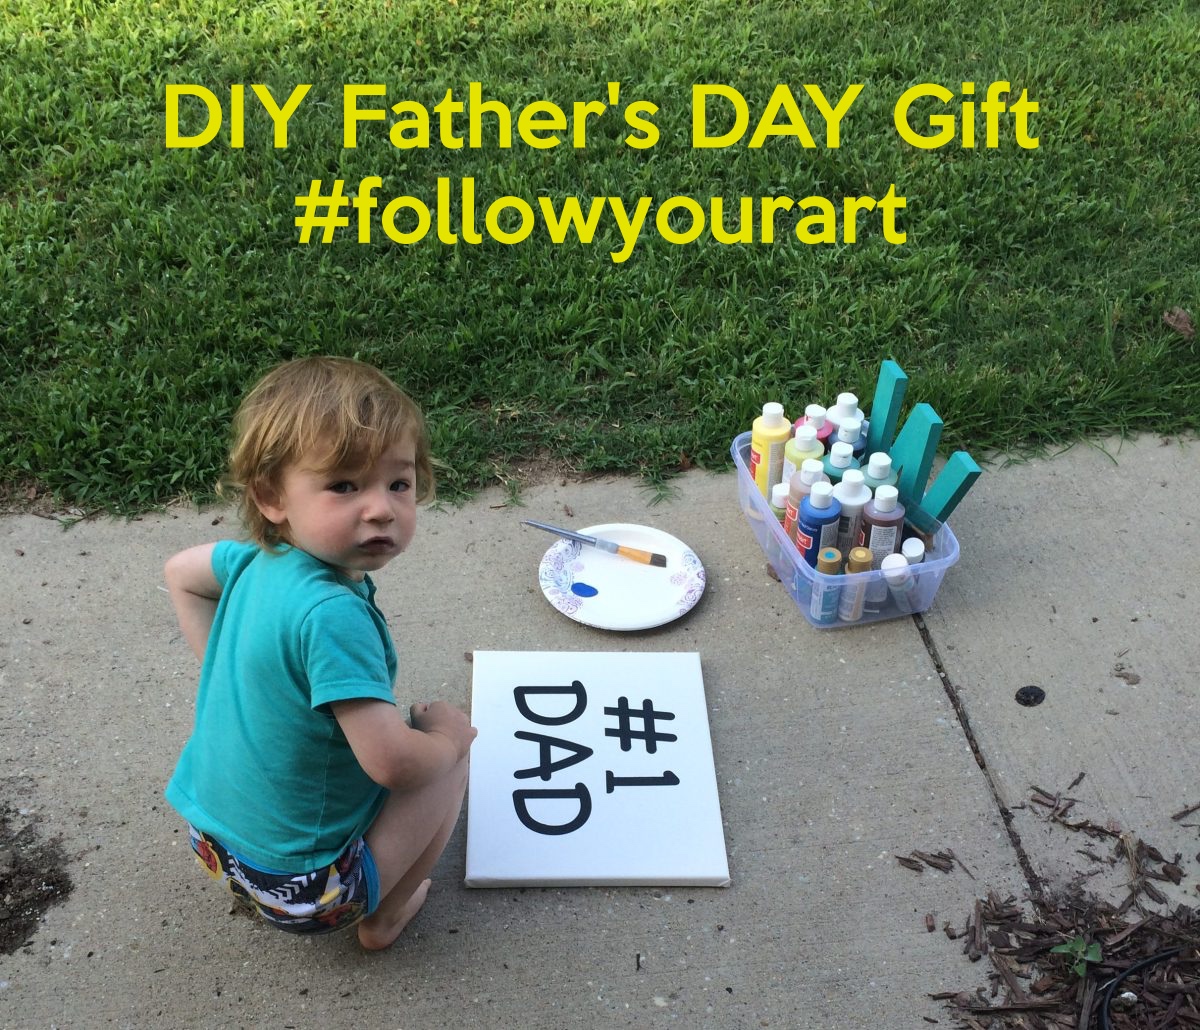 DIY Father's Day Gift canvas painting. Get creative with your family #followyourart #gymboree #sponsored